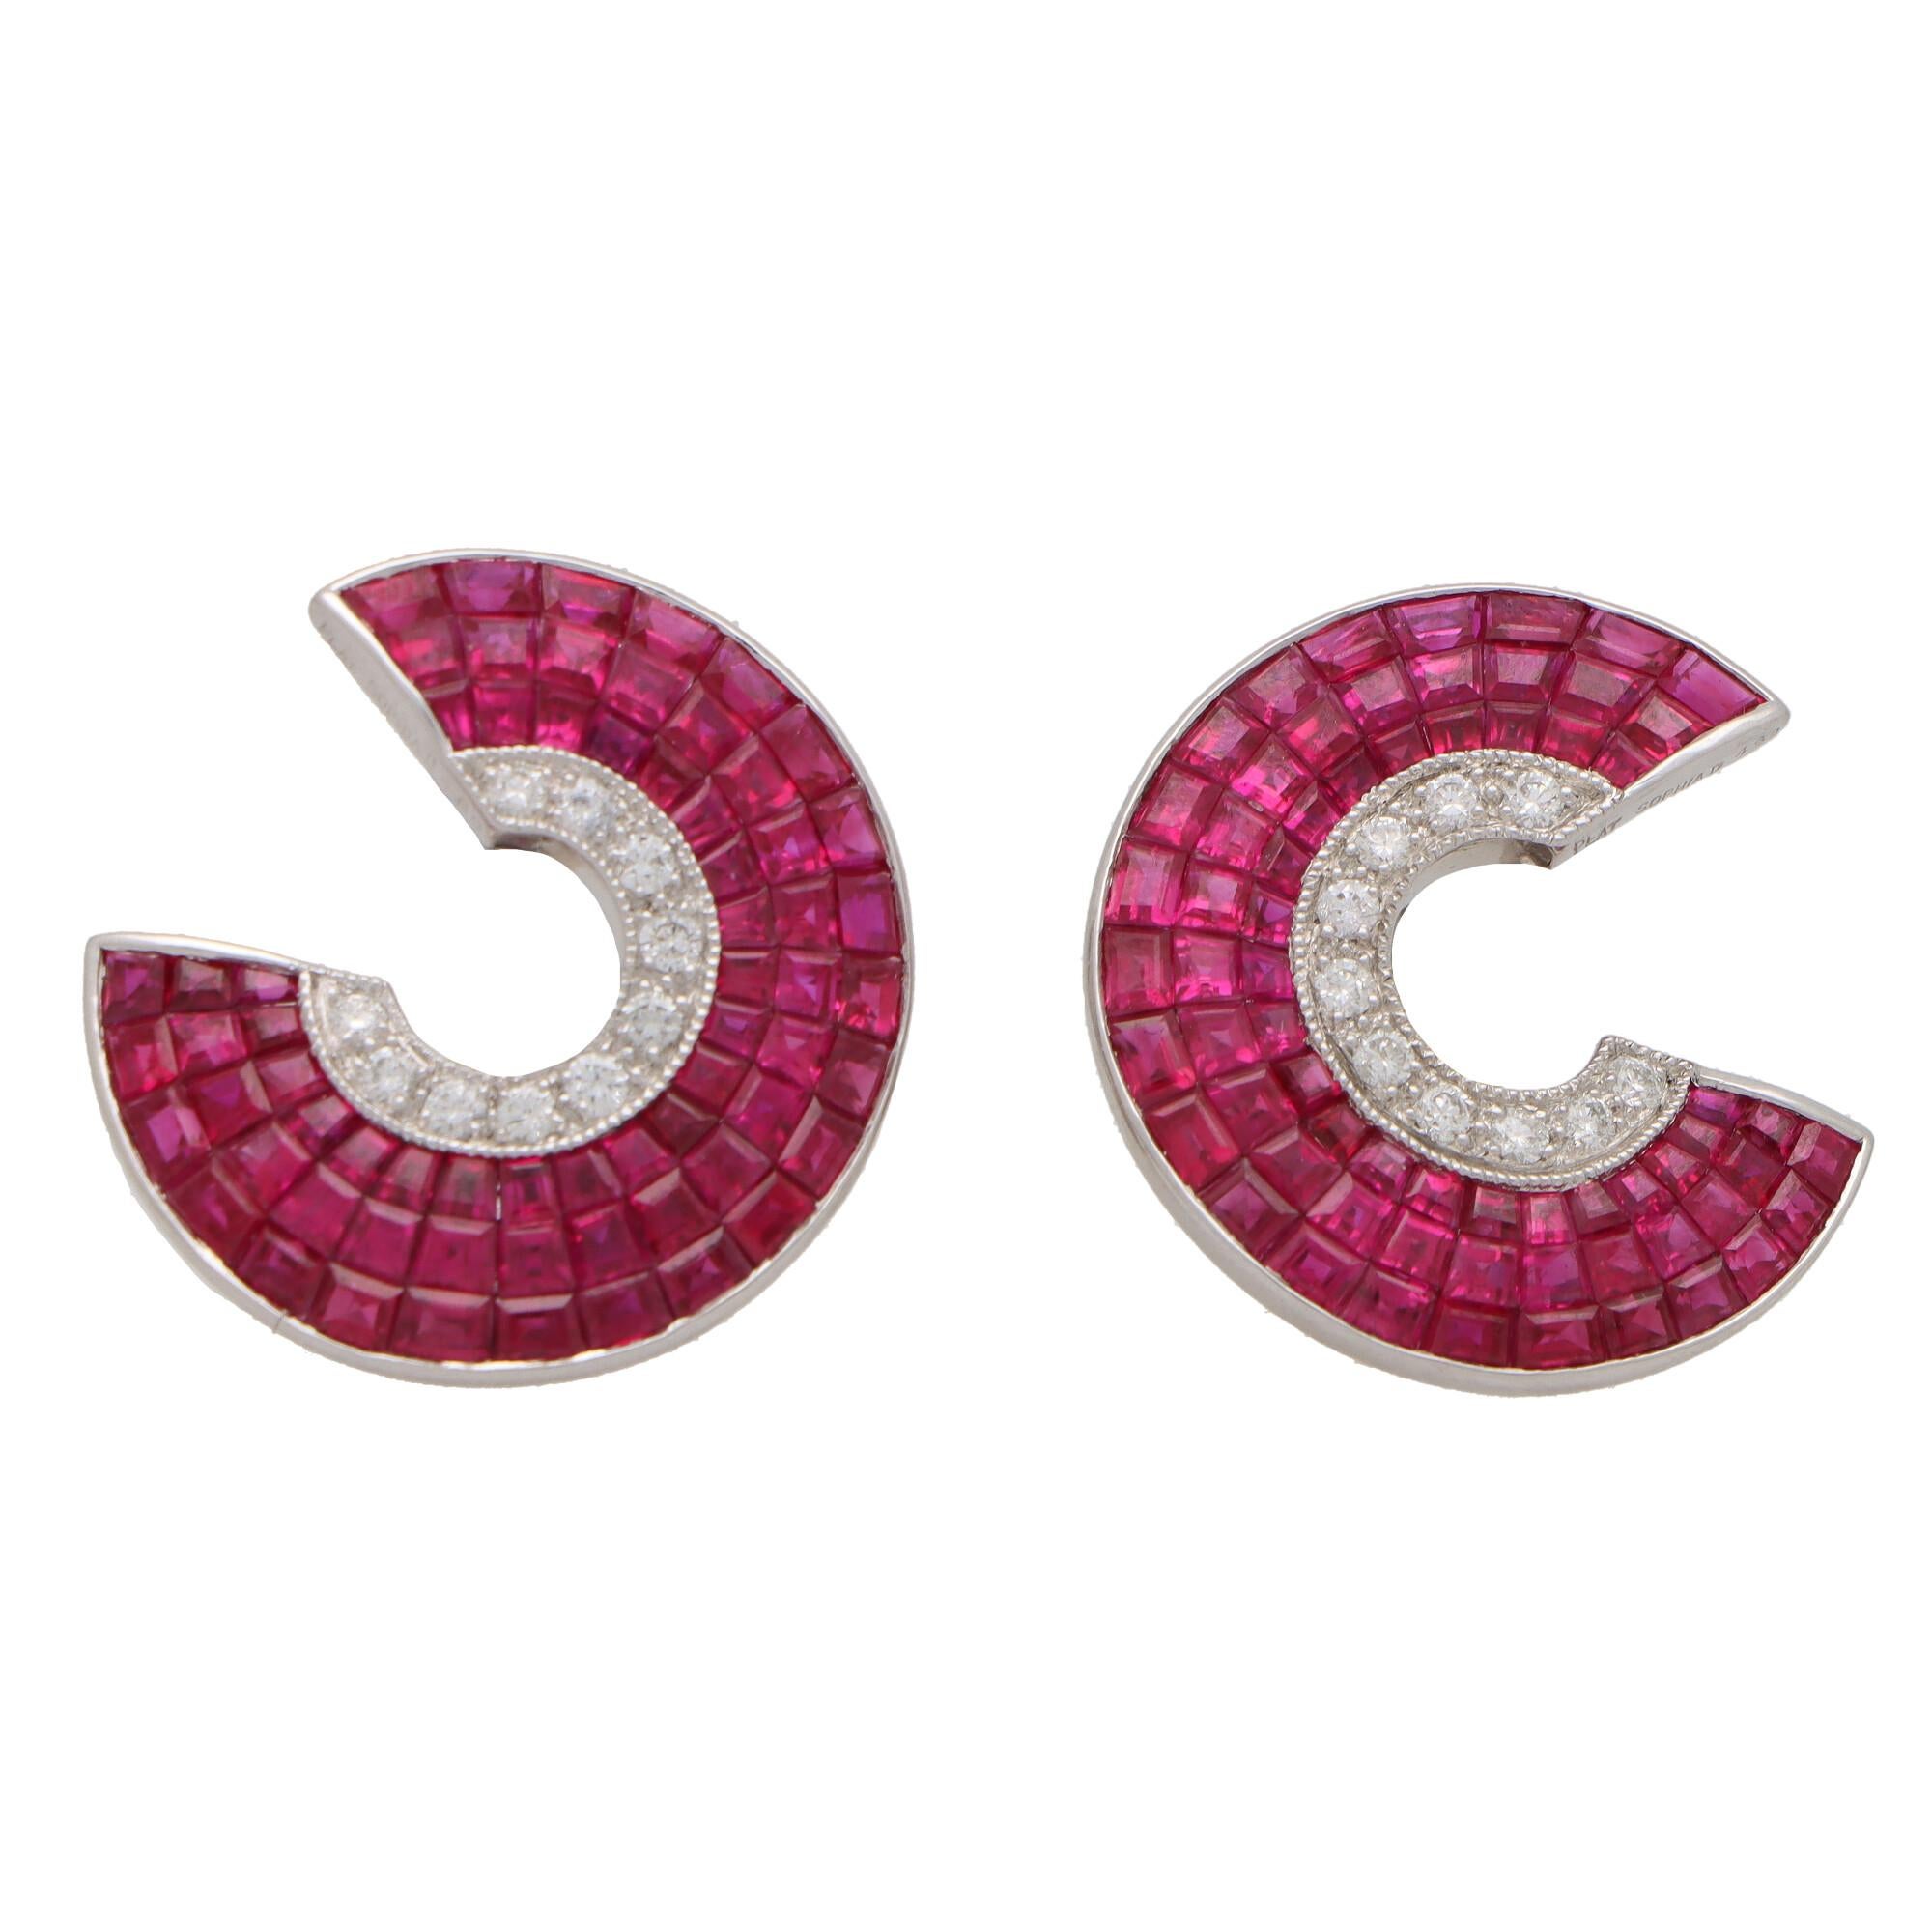 Round Cut Art Deco Style Invisibly Set Ruby and Diamond Earrings Set in Platinum